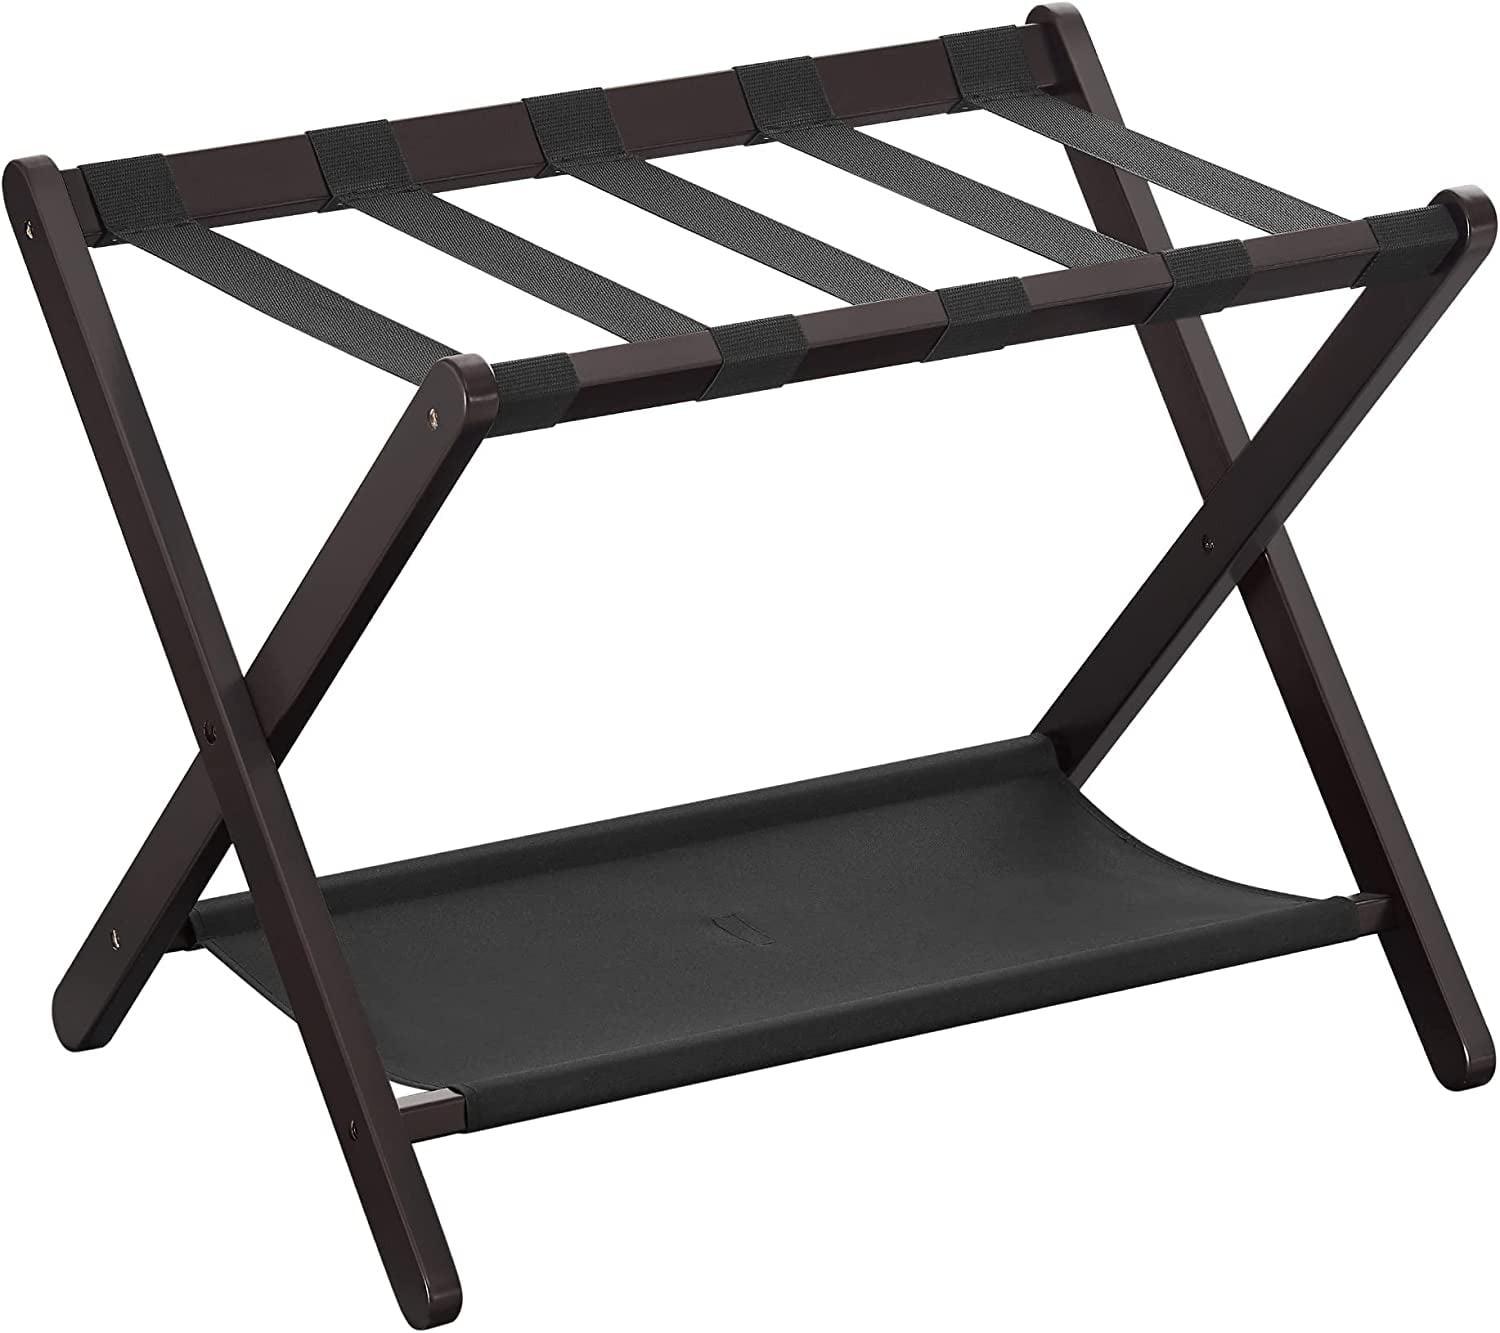 SONGMICS Wood Luggage Rack Folding Suitcase Stand Heavy-Duty Holds up to  121 lb Easy Assemble for Guest Room Hotel Bedroom Expresso and Black 